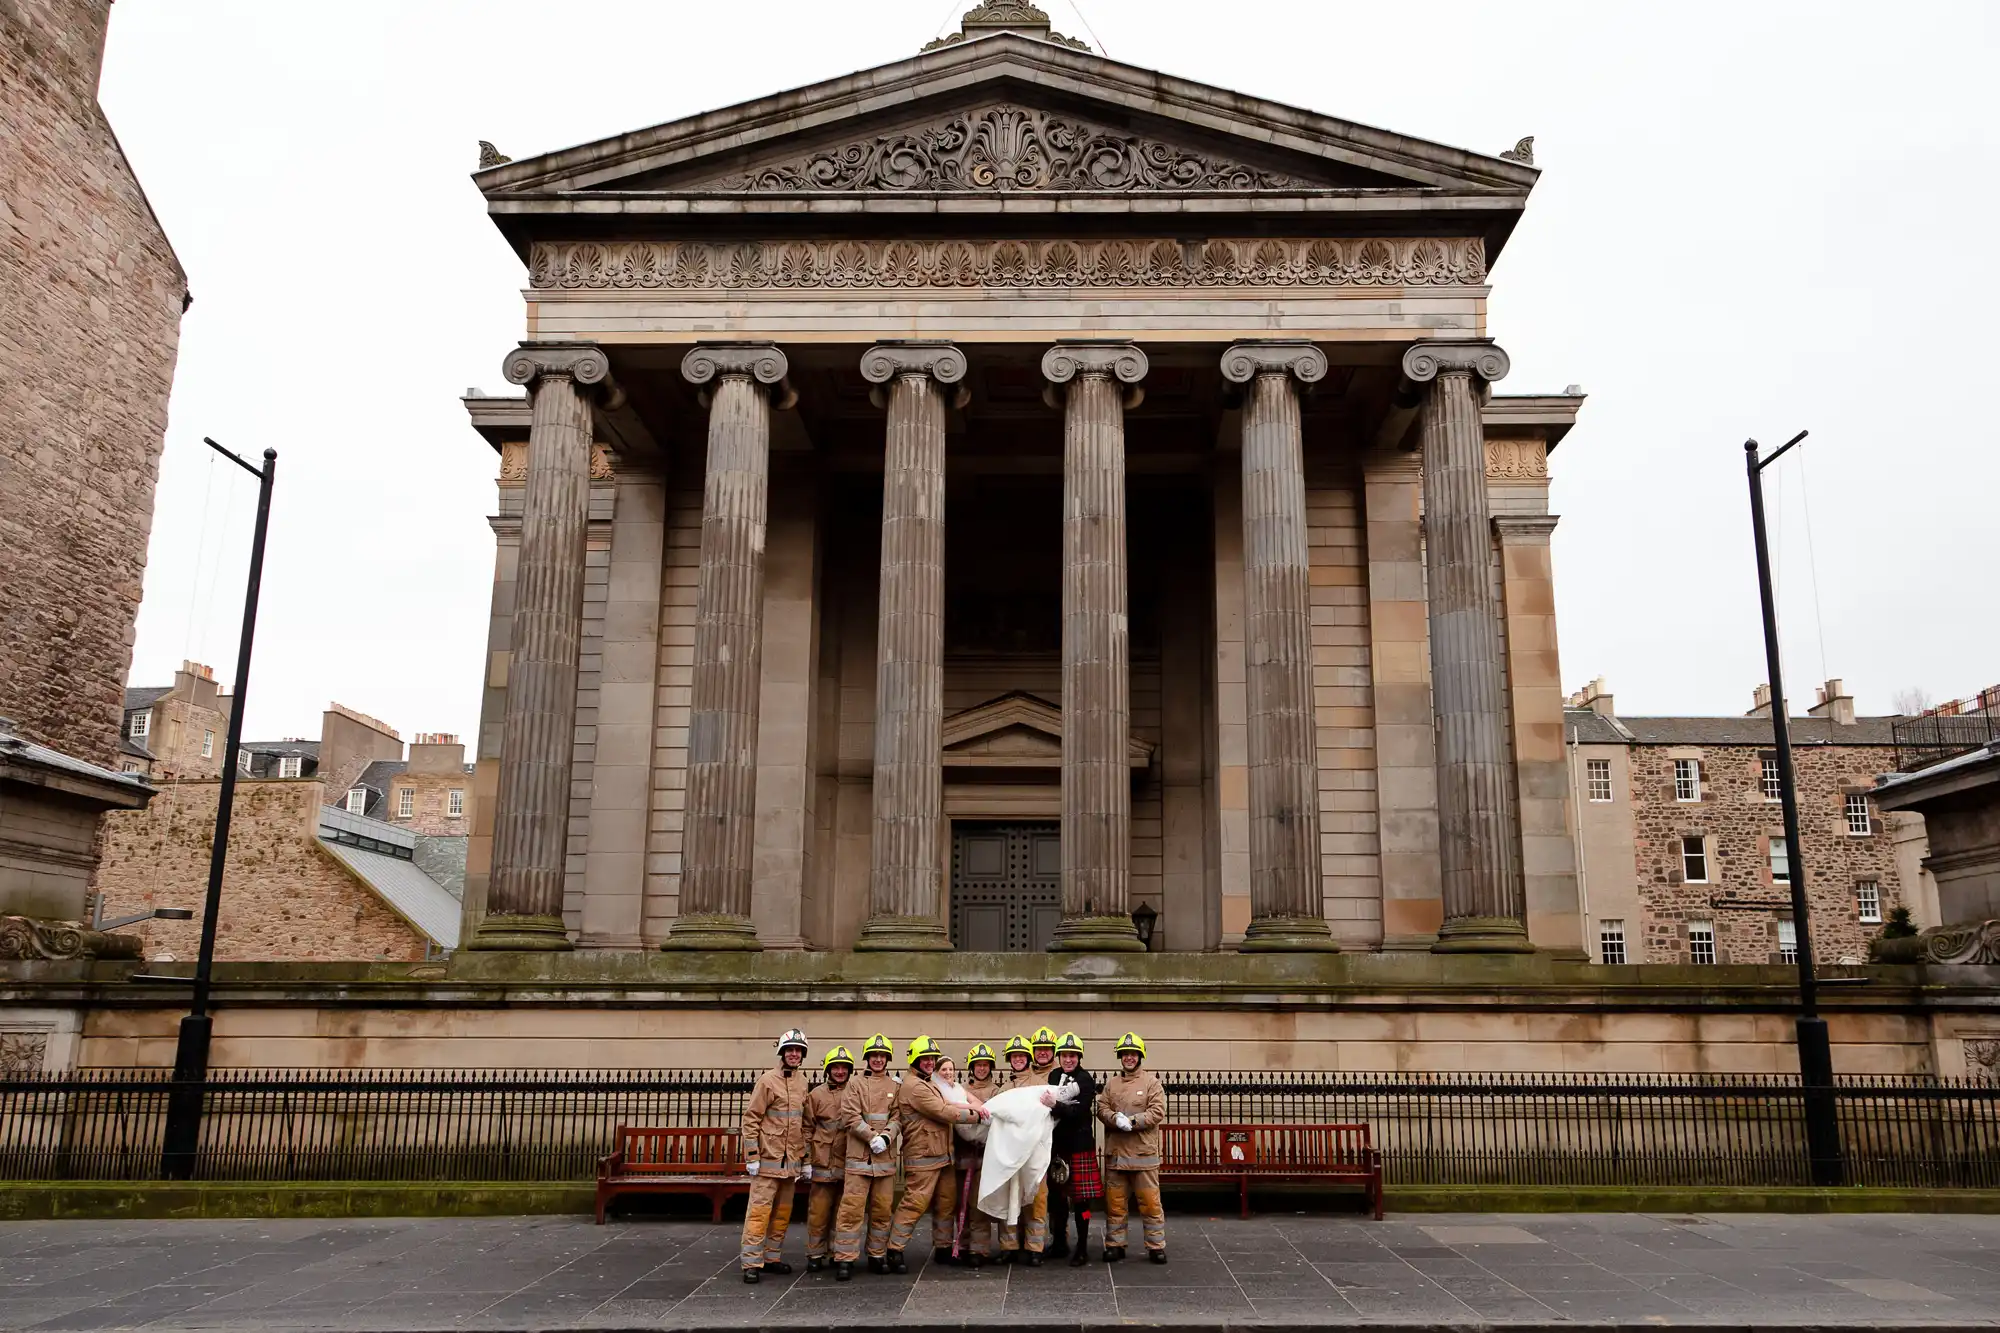 A group of firefighters in full gear posing in front of an imposing neoclassical building with a large triangular pediment and columns.